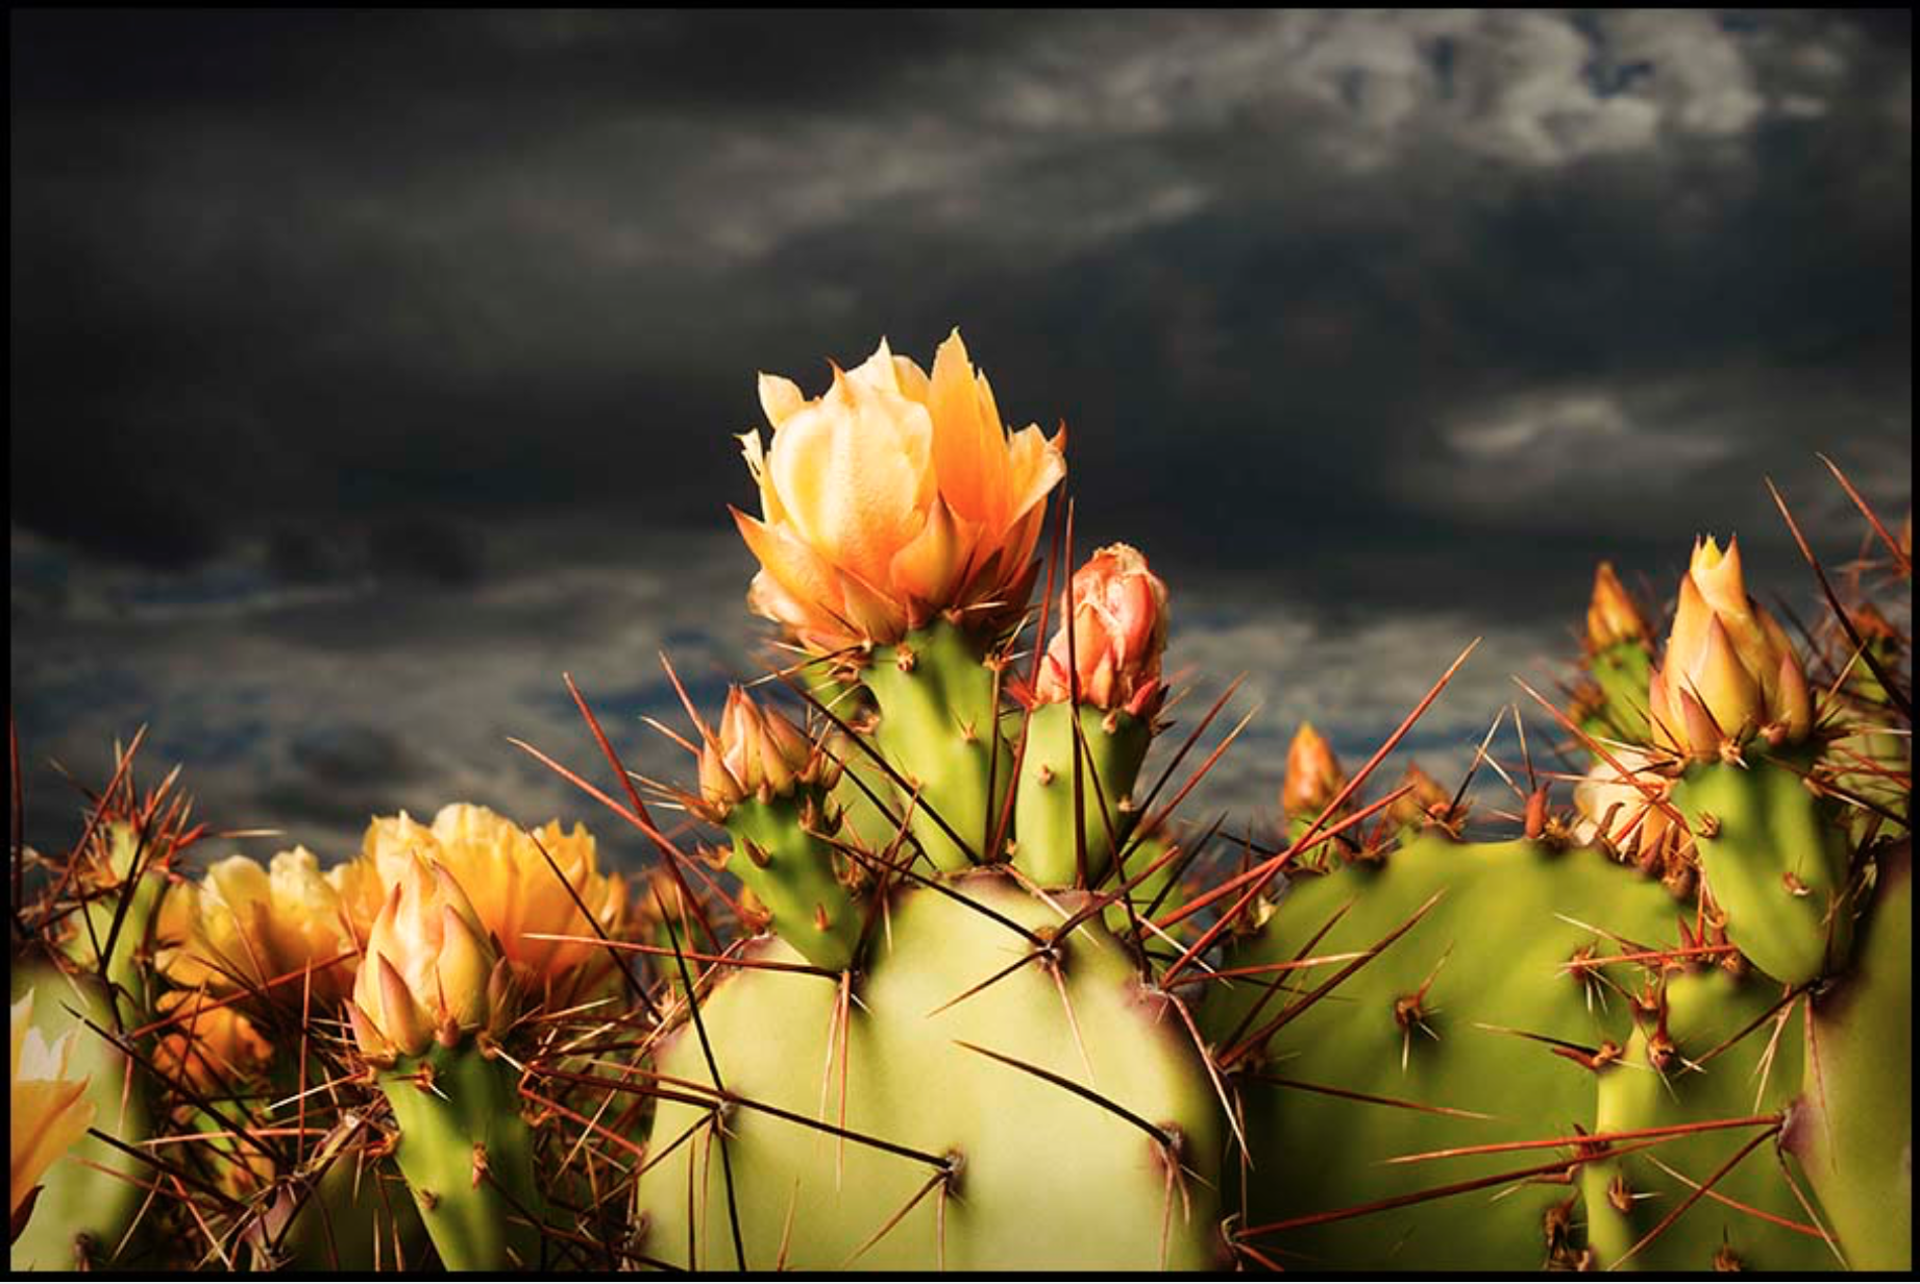 Prickly Pear by James H. Evans